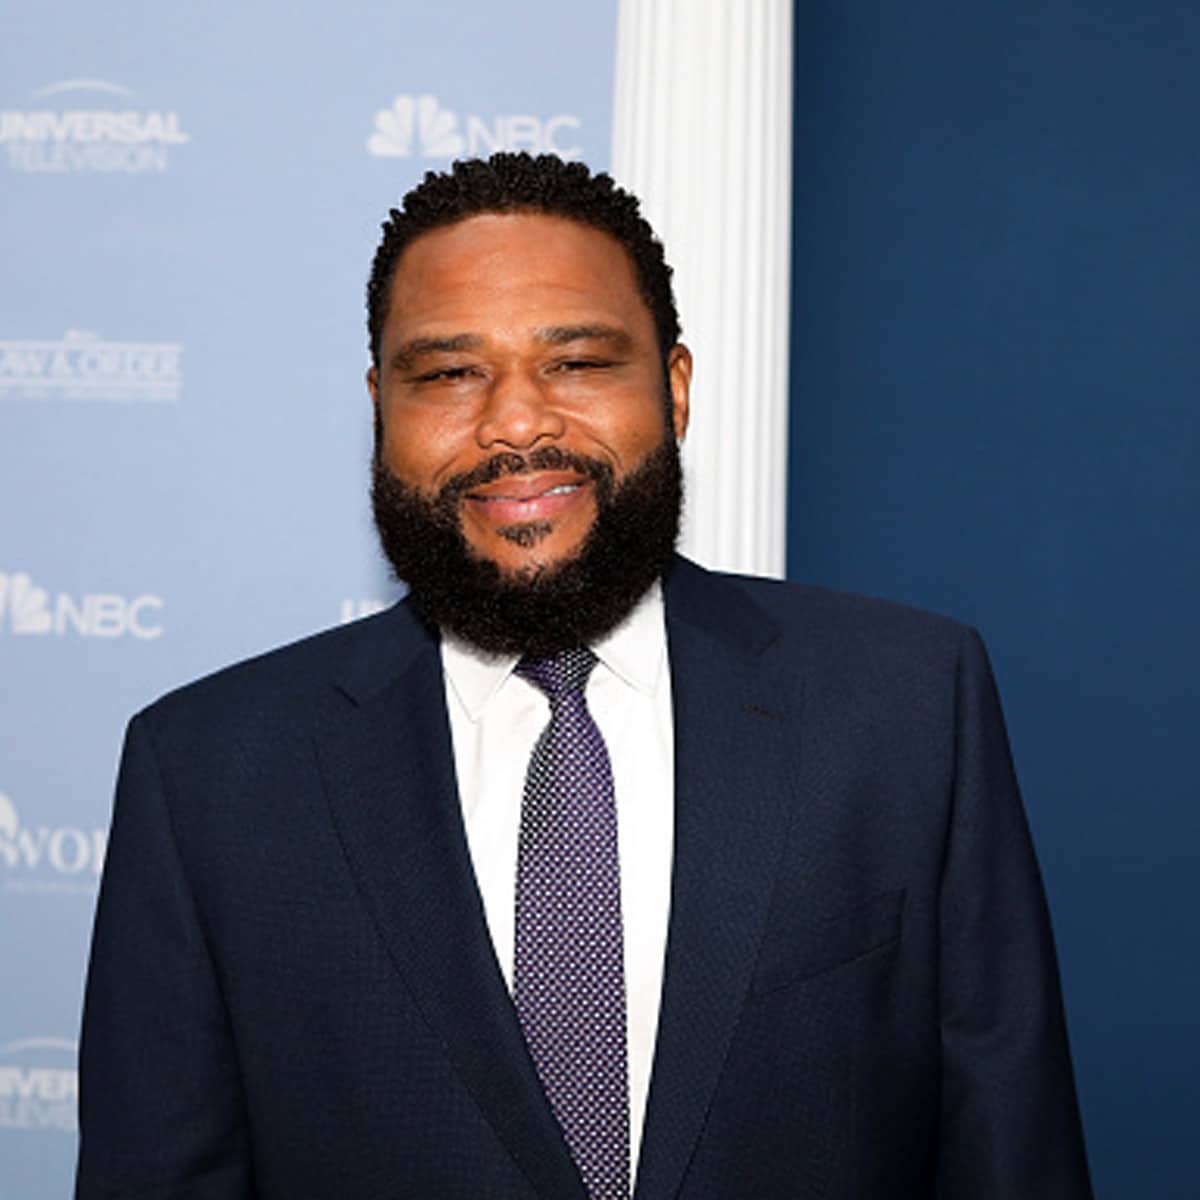 actor anthony anderson attends nbc's law & order press junket